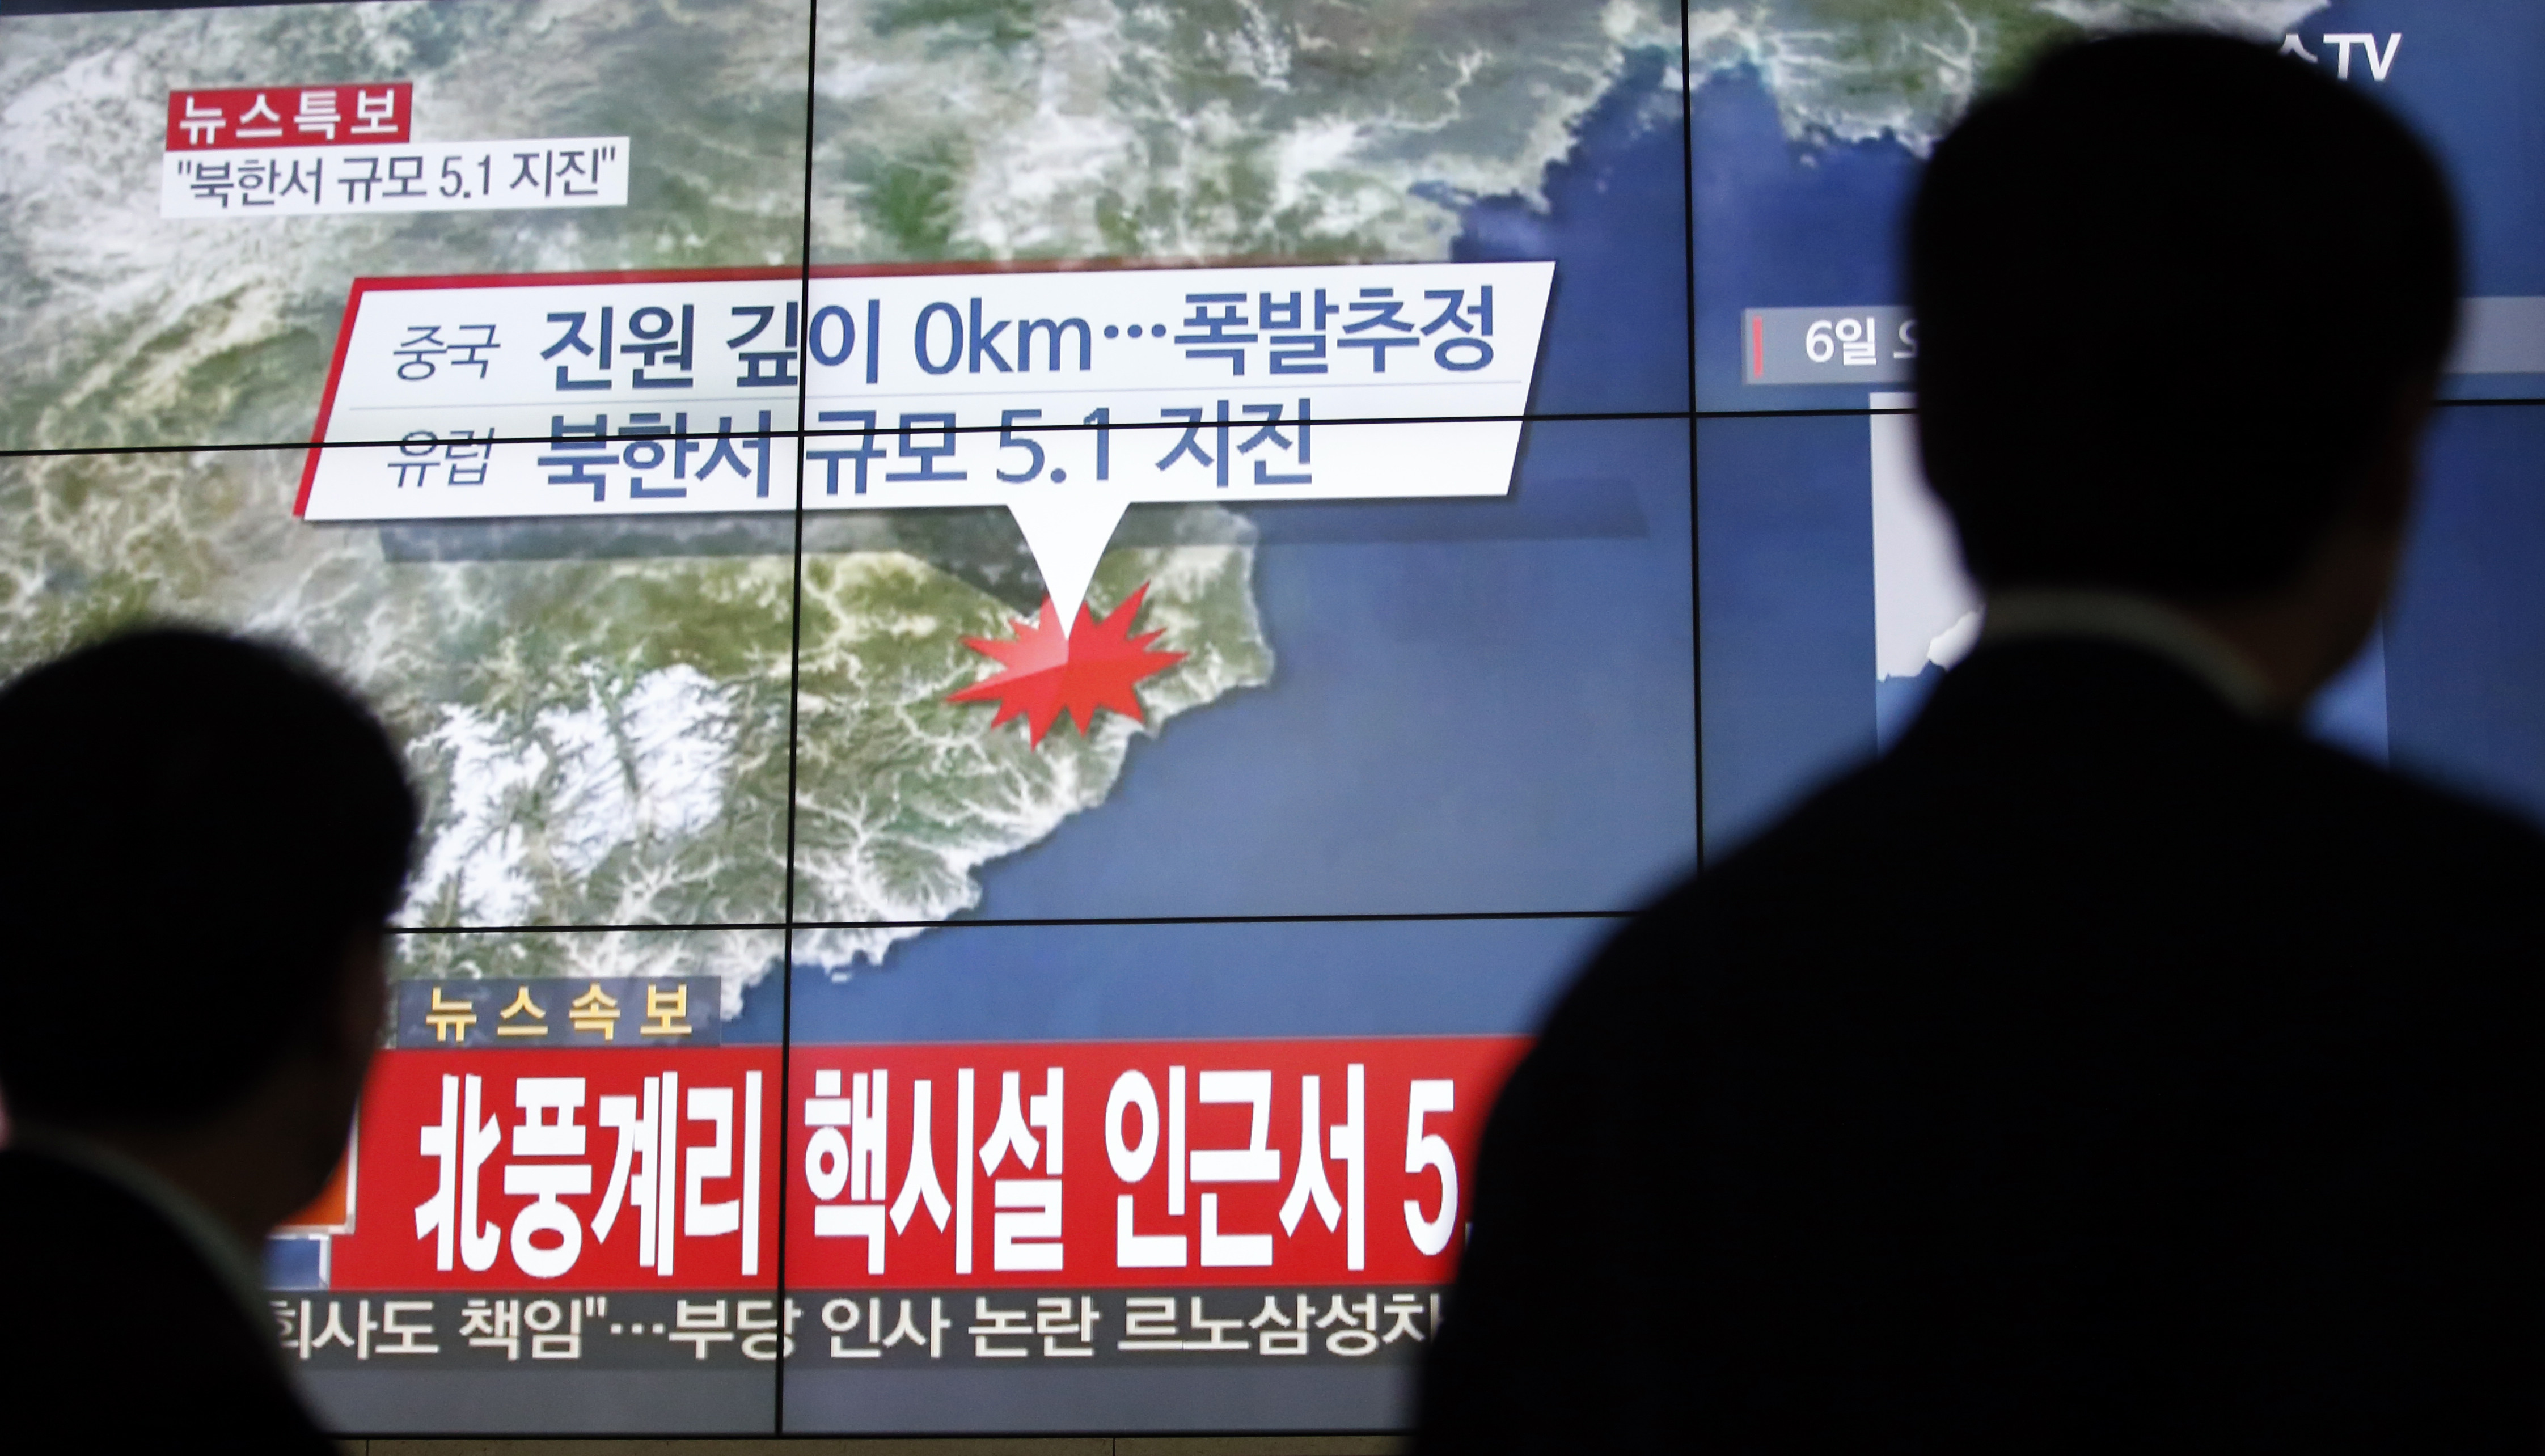 BBG networks provide crucial information on North Korea nuclear tests